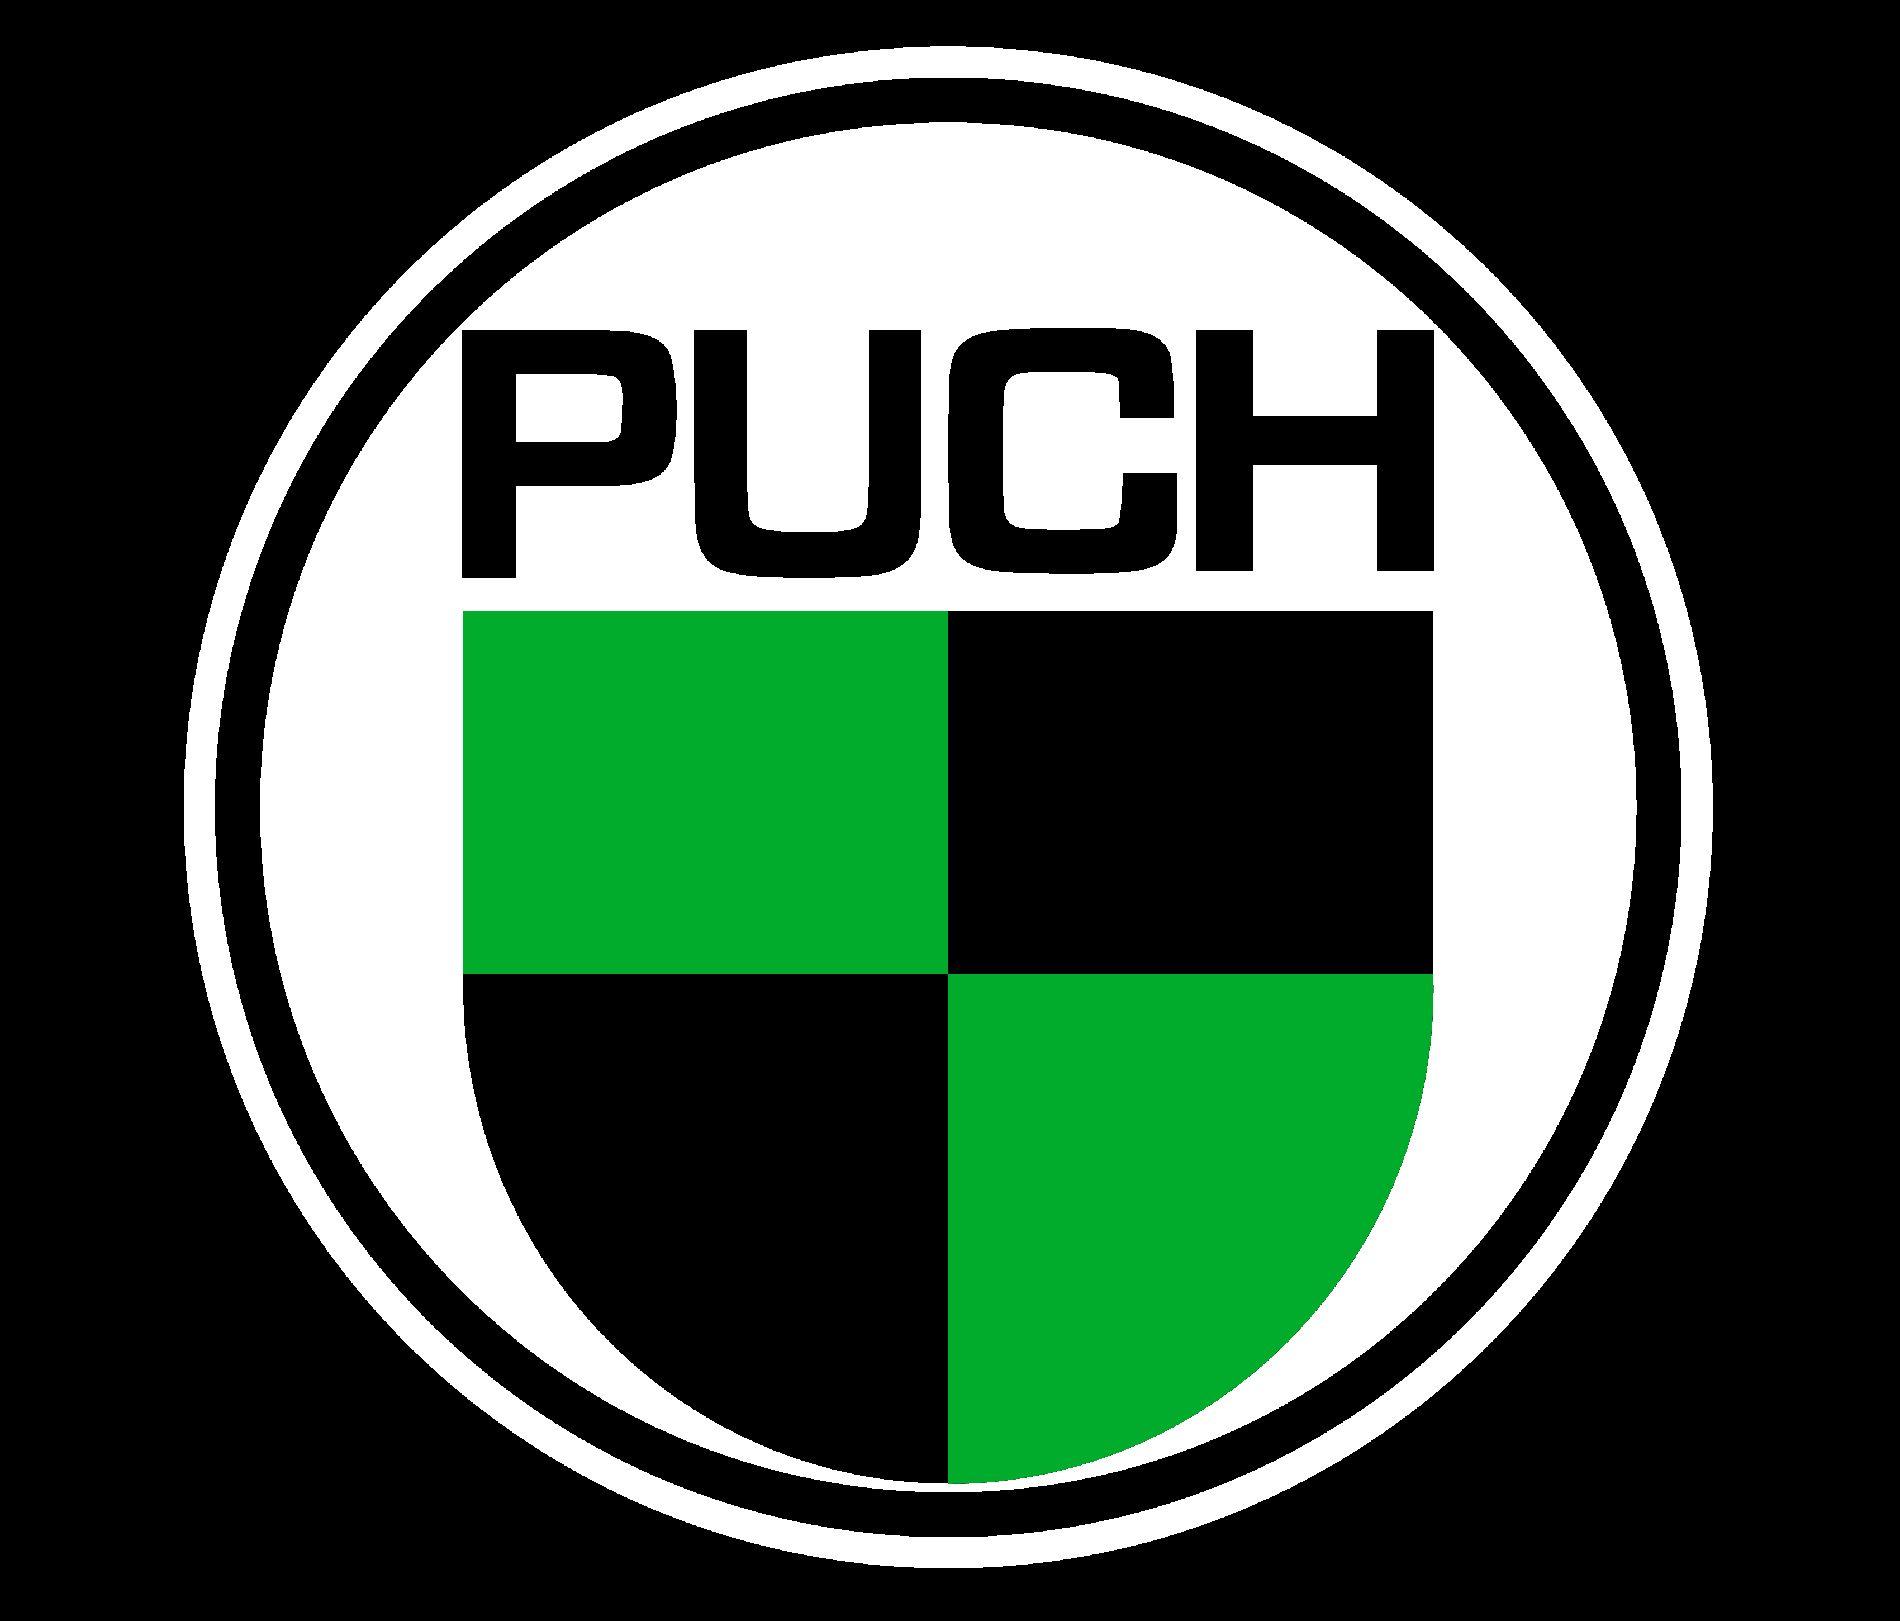 Puch Logo - Puch Logo | Motorcycle brands: logo, specs, history.